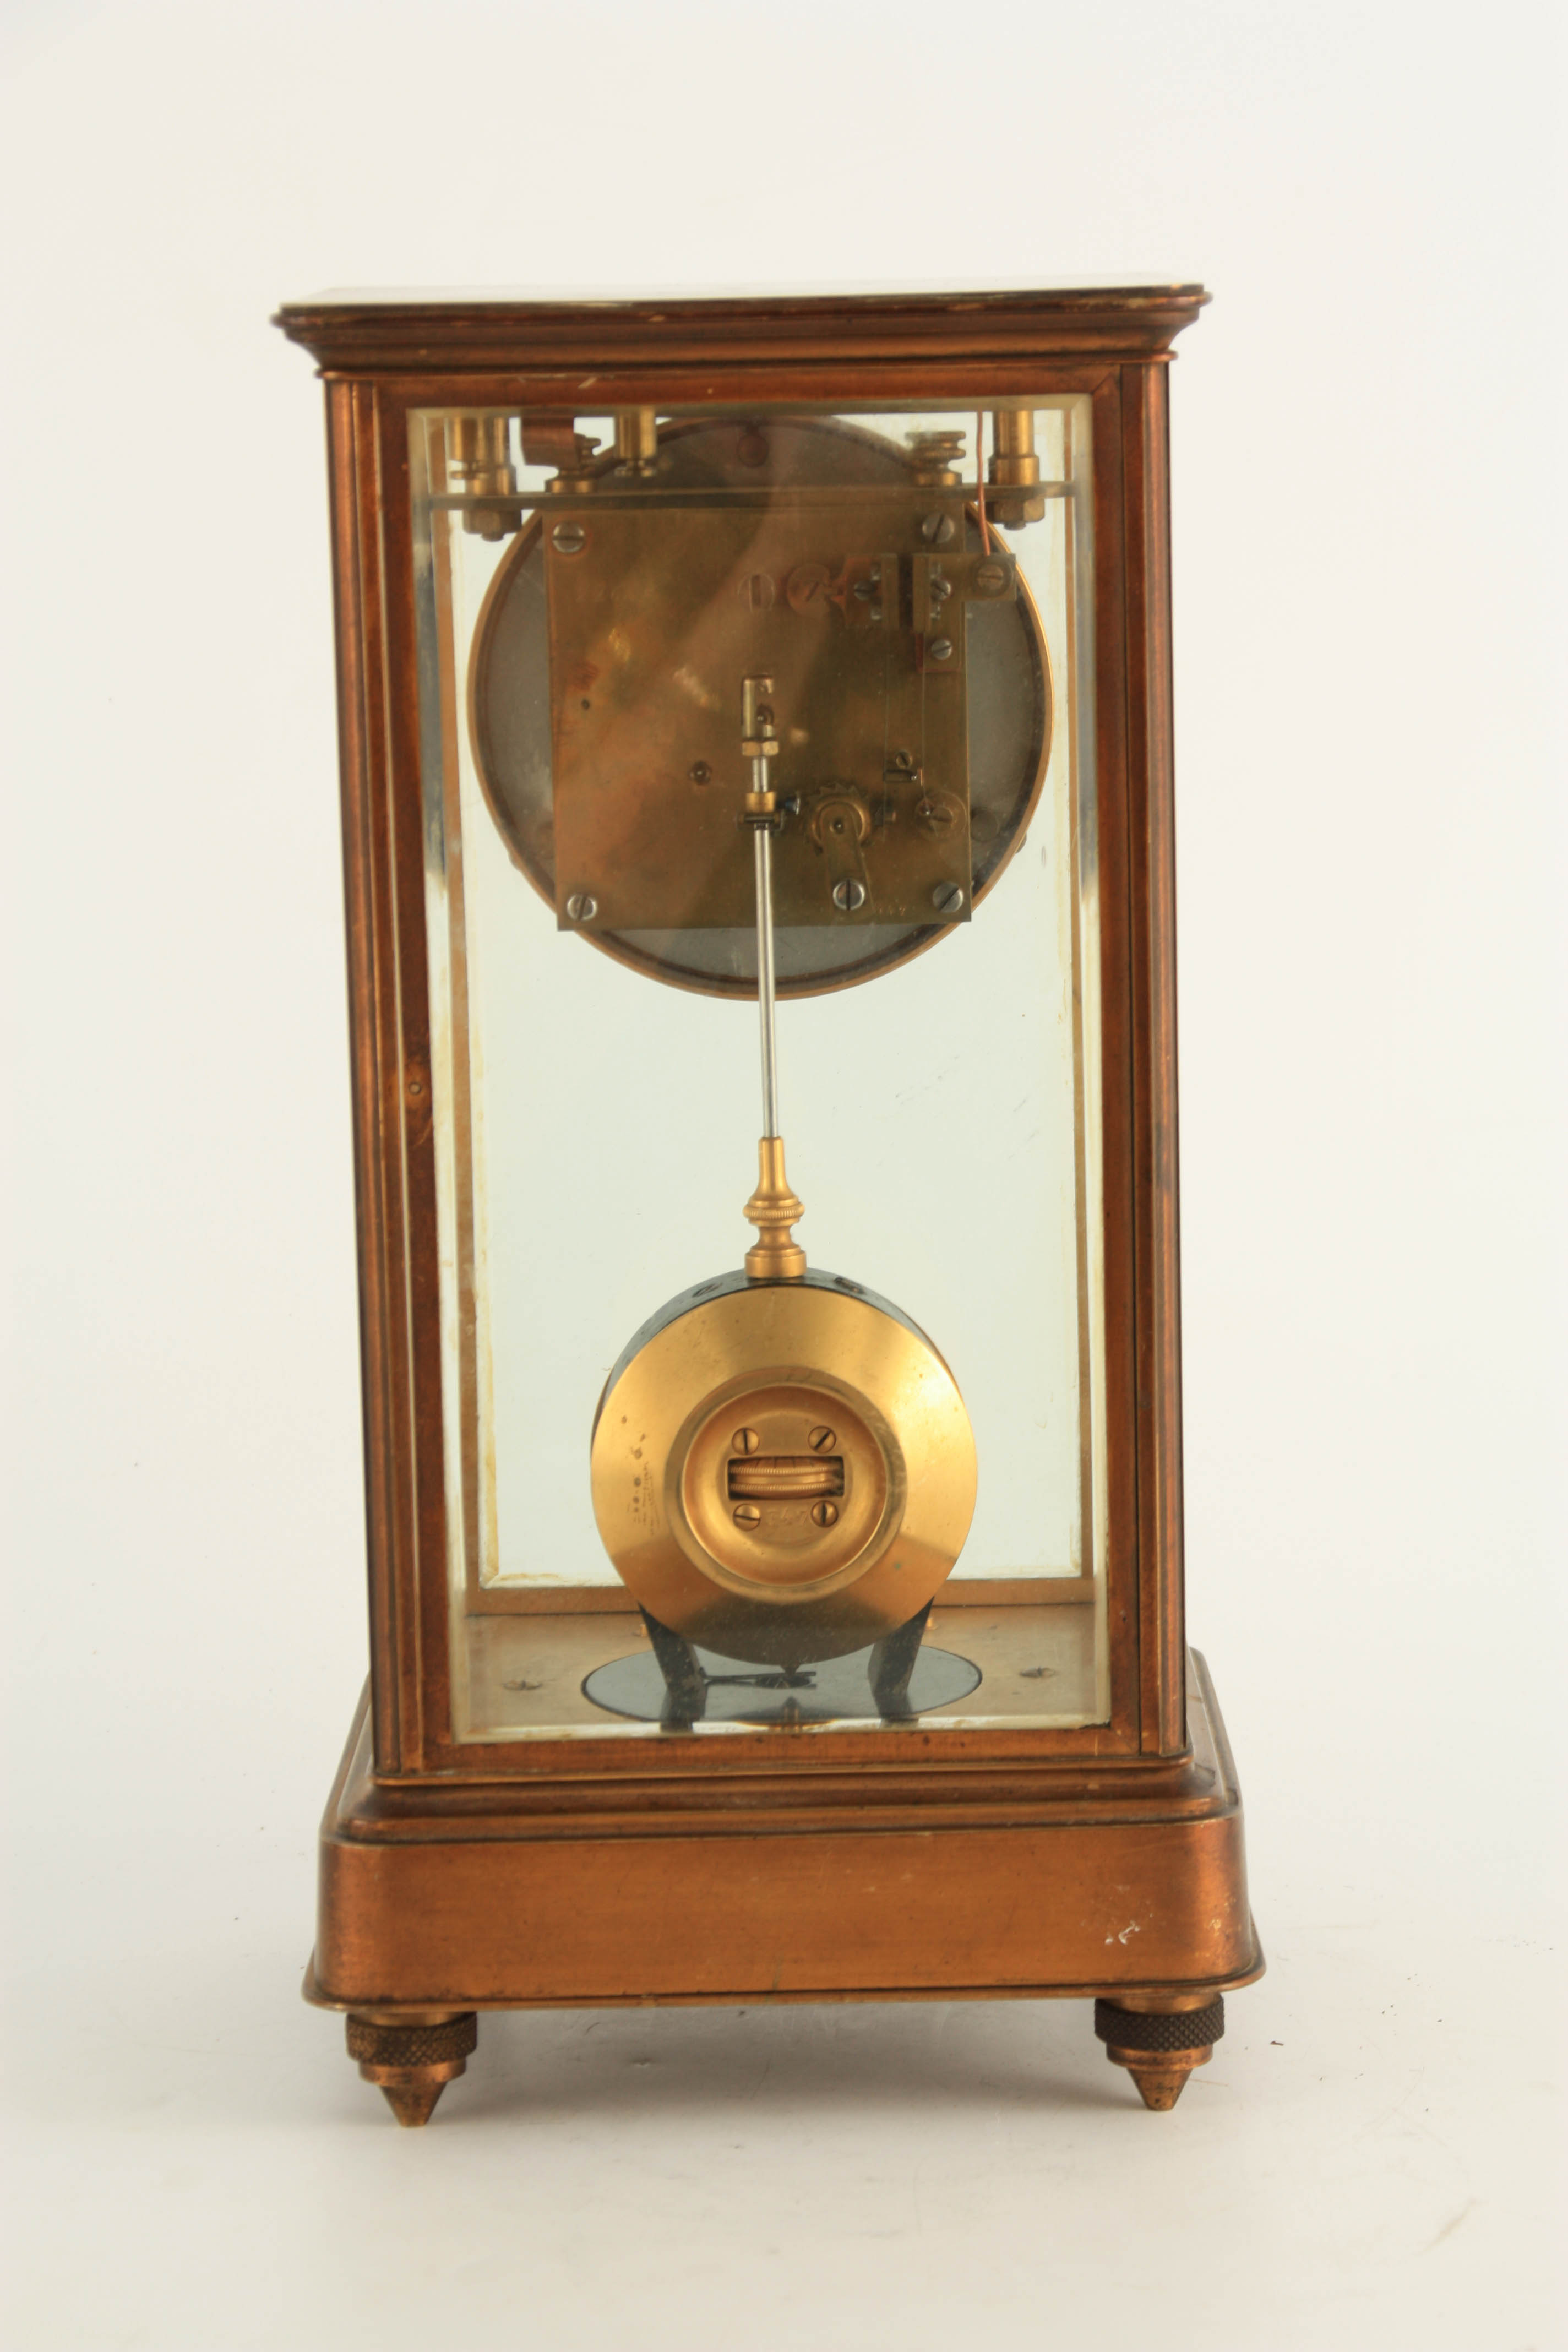 L. LEROY & CO. PARIS A RARE AND GOOD QUALITY EARLY 20TH CENTURY ELECTRIC FOUR-GLASS MANTEL CLOCK the - Image 5 of 5